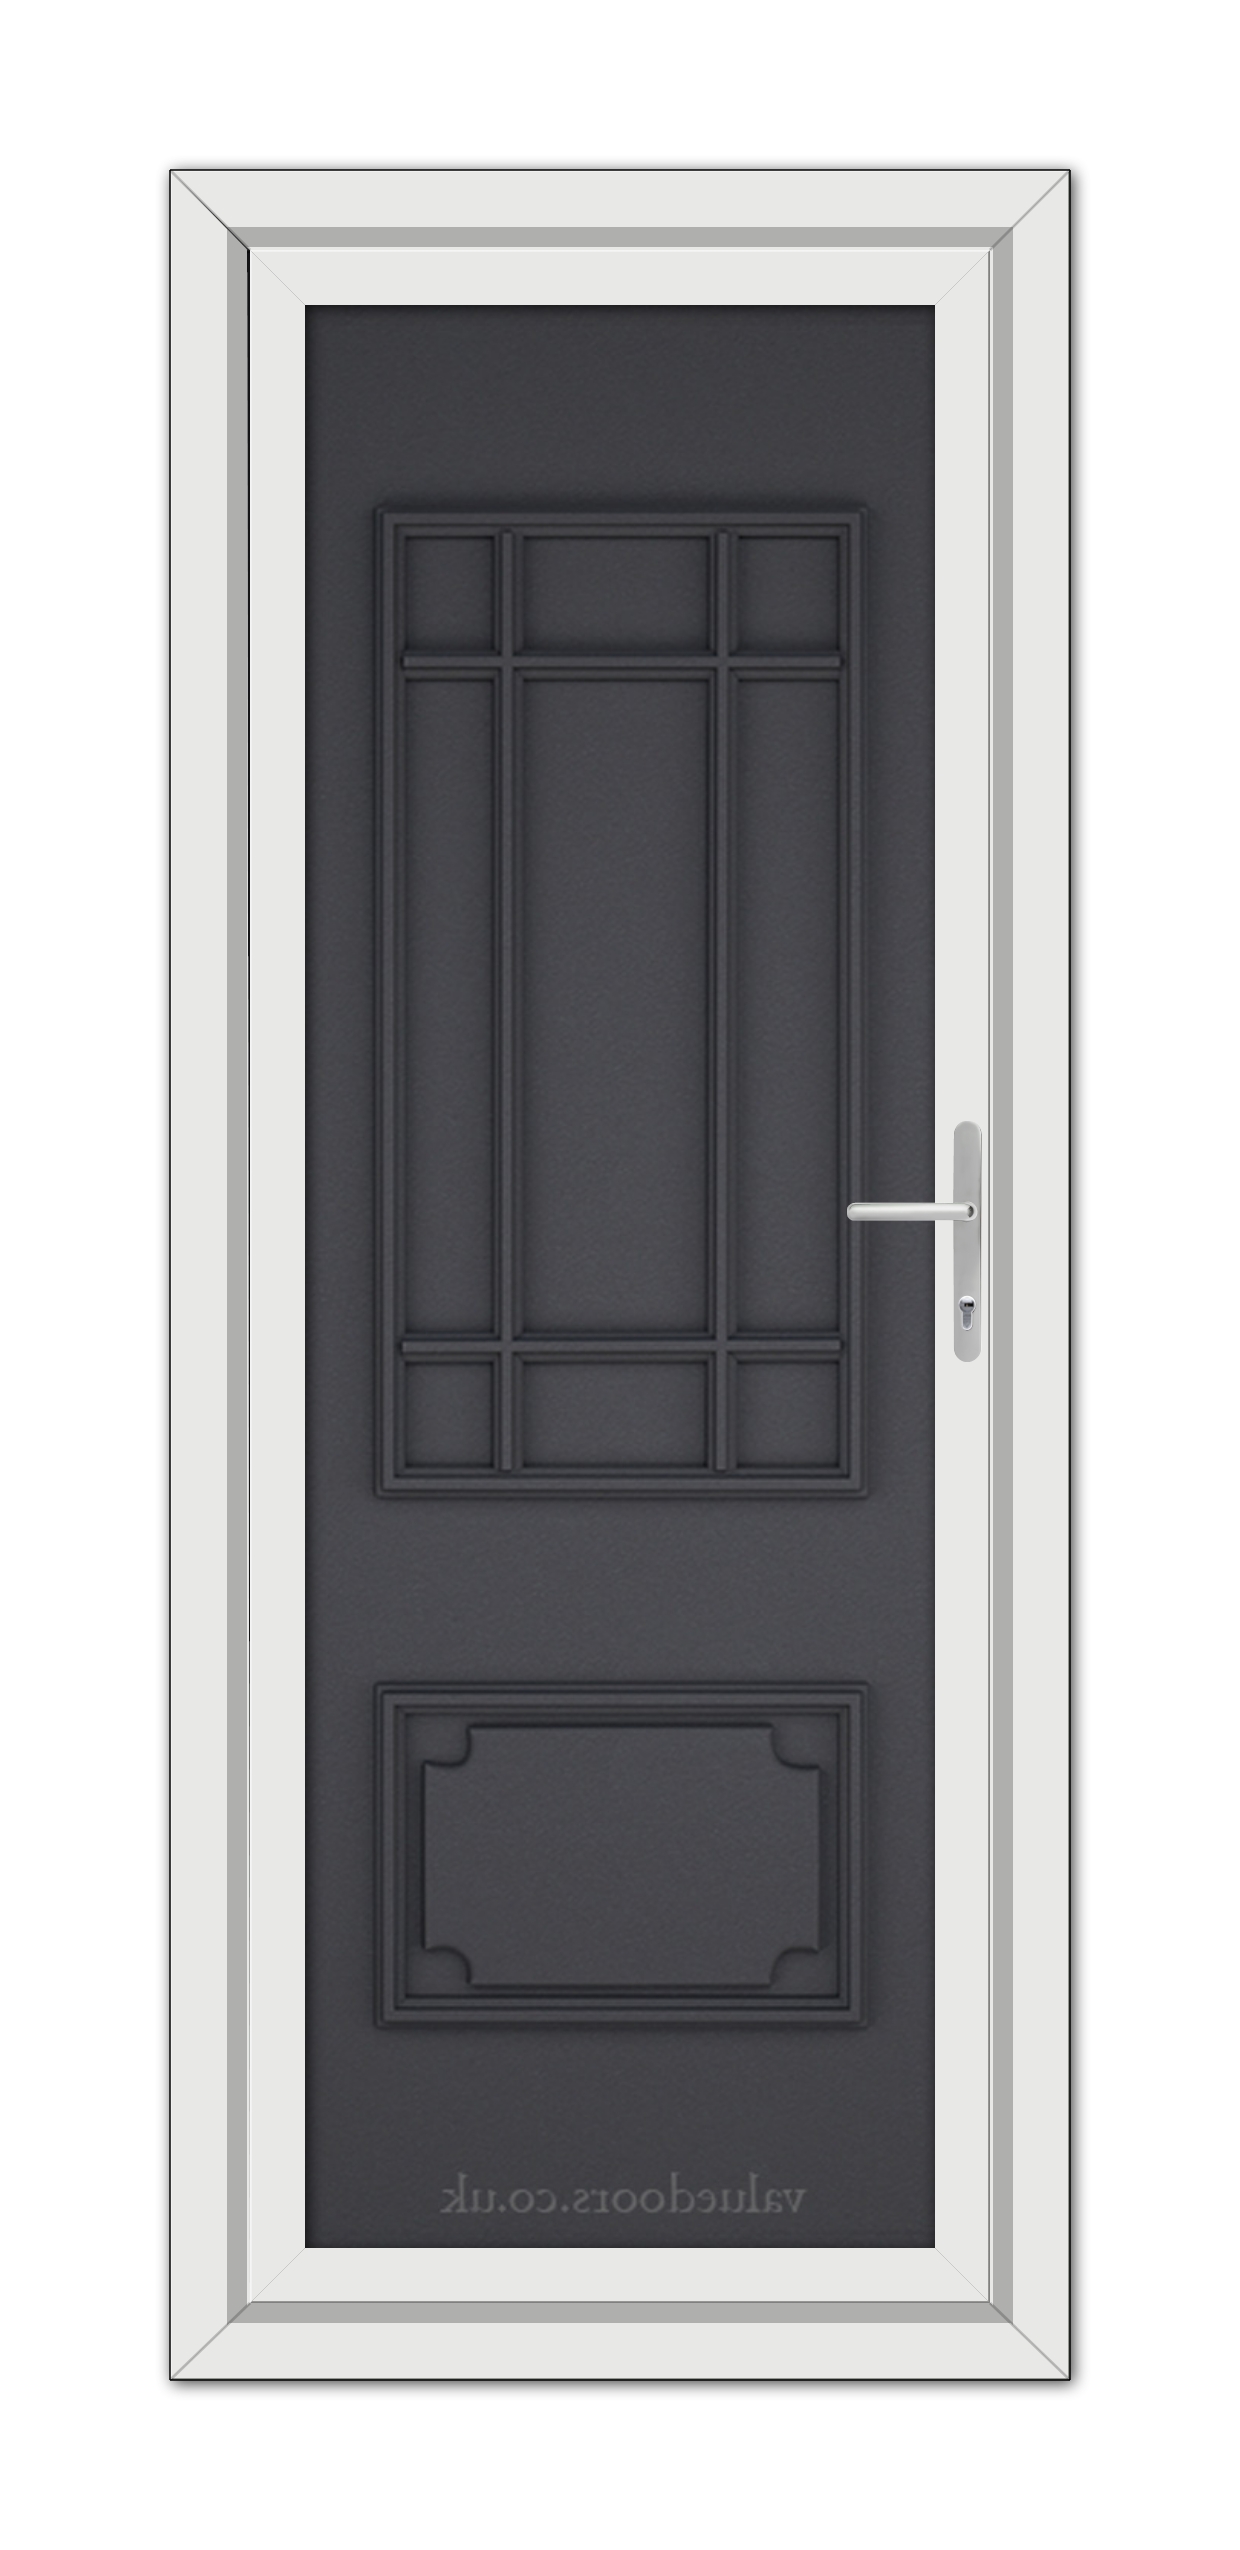 A vertical image of a closed, modern Grey Grained Seville Solid uPVC door with a white frame and silver handle.